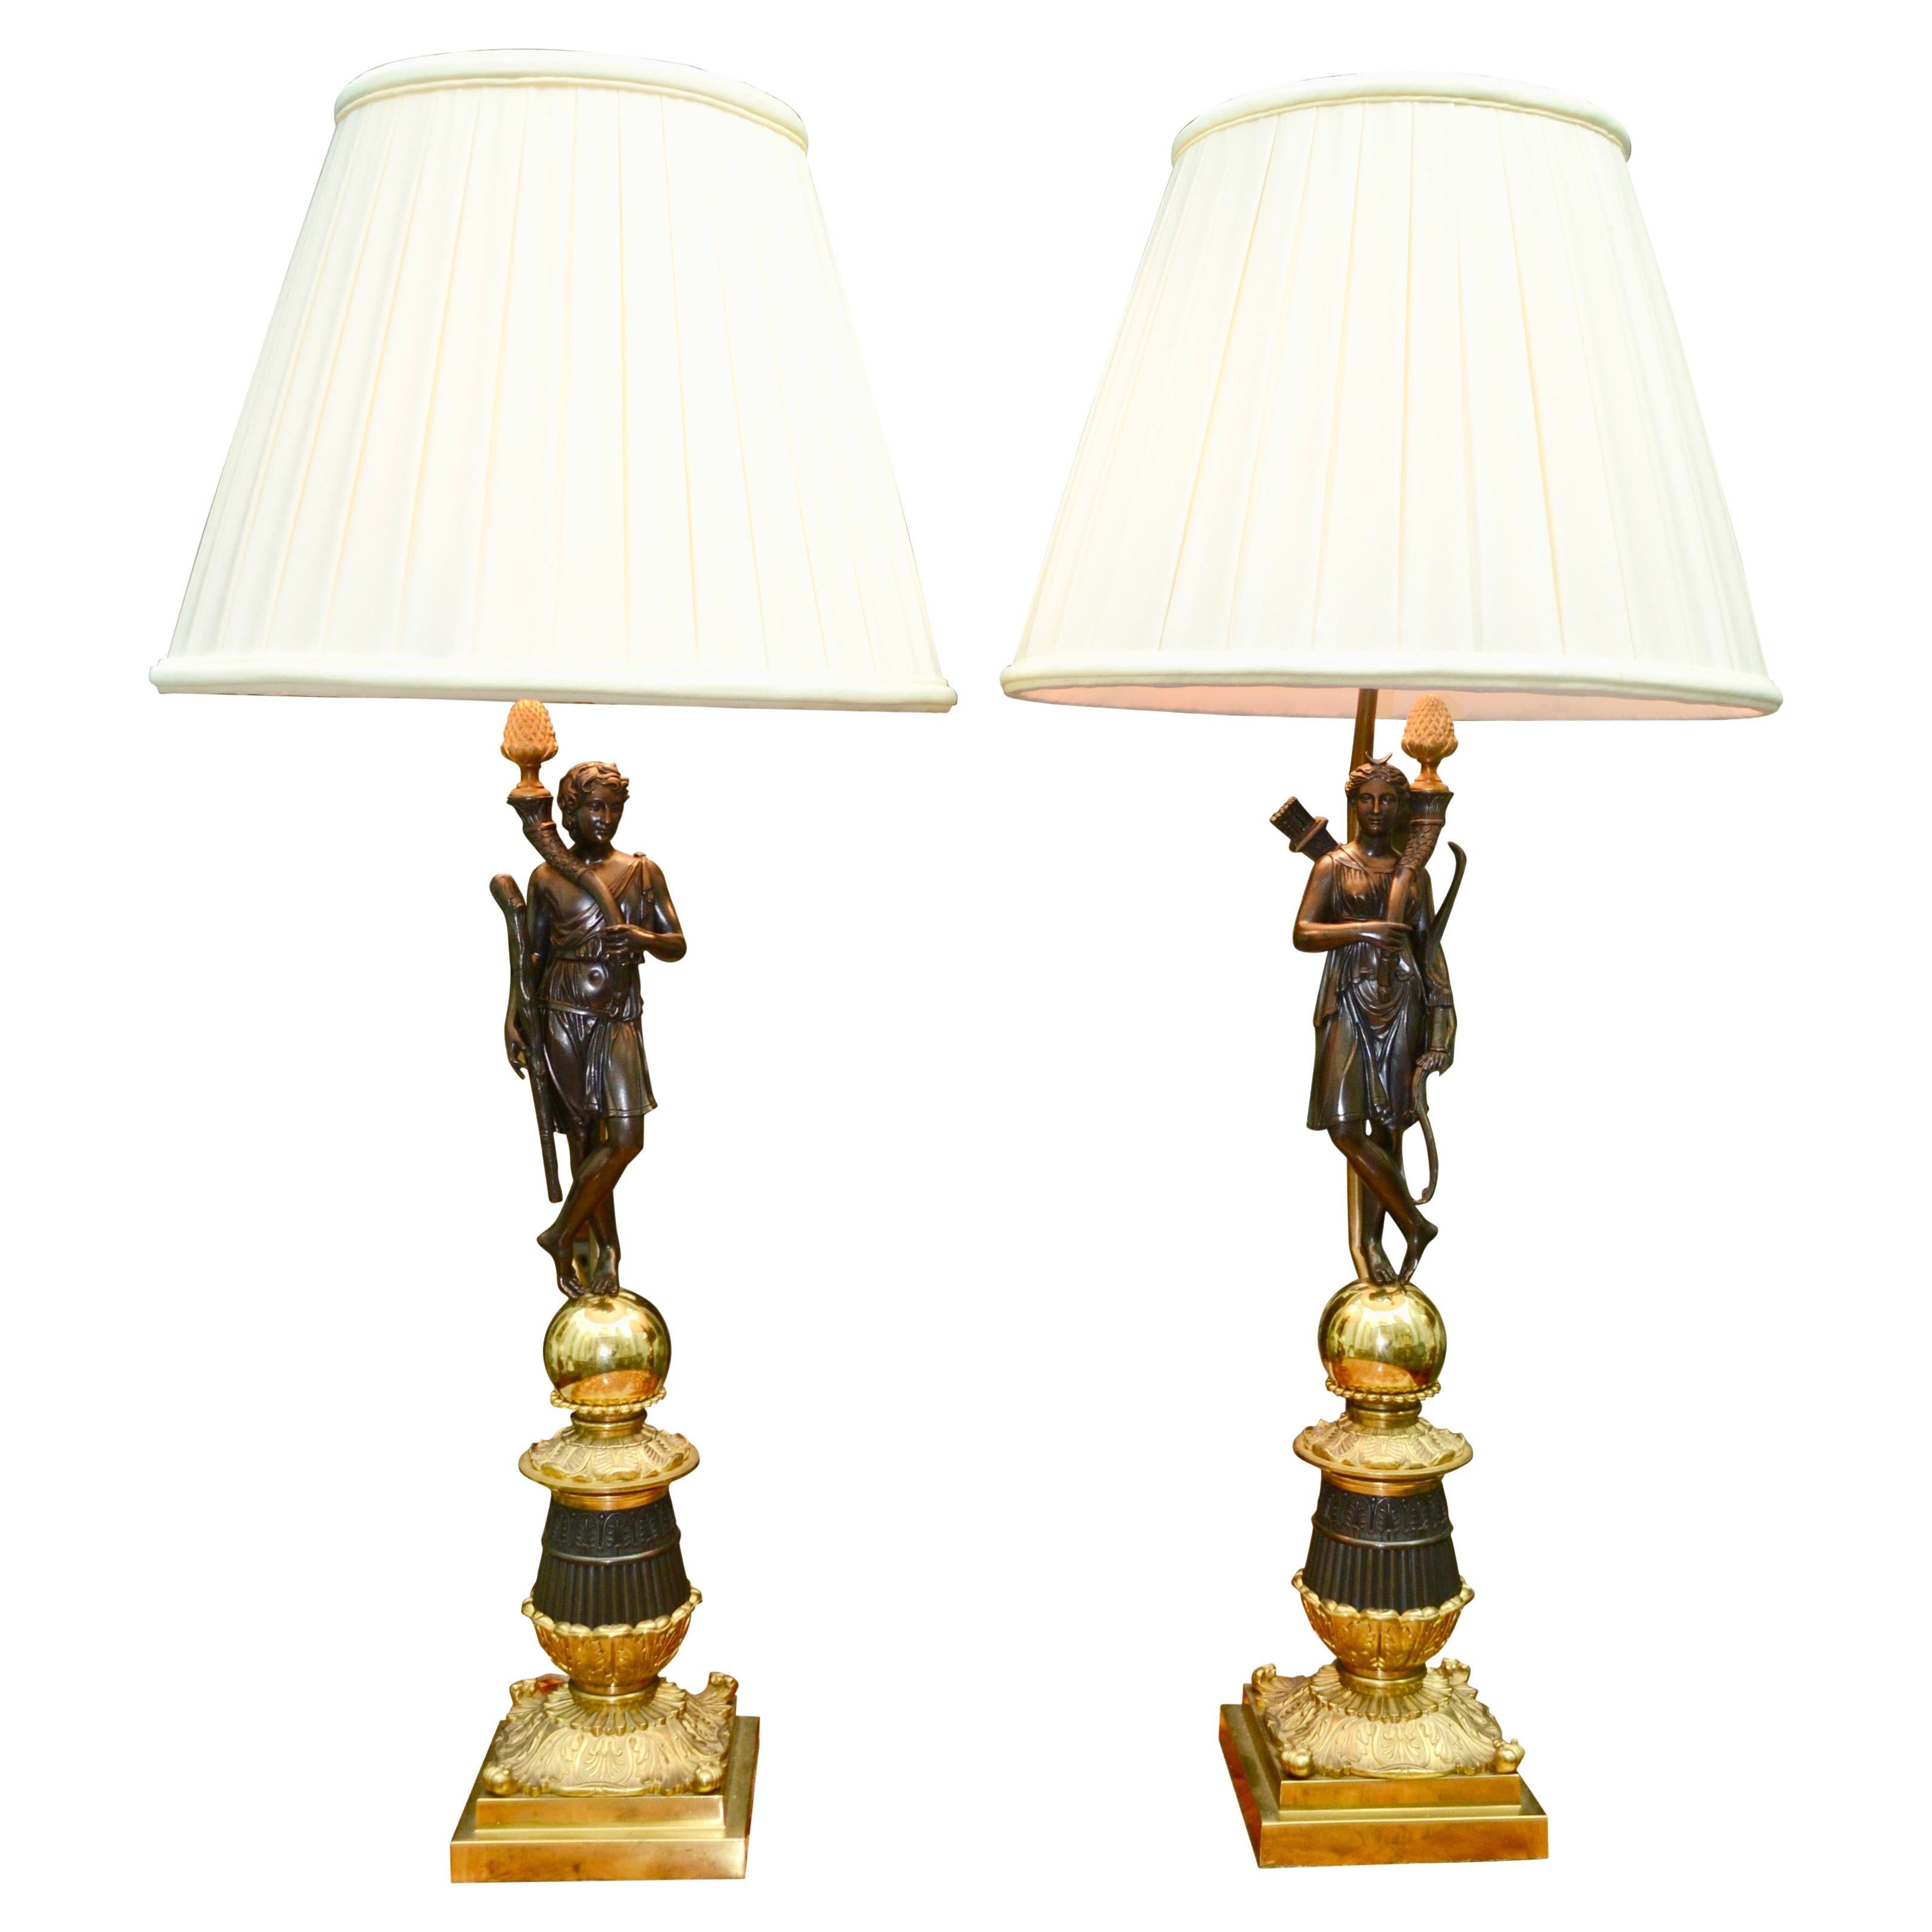 Pair of French 19 Century Neoclassical Figurative Bronze Lamps